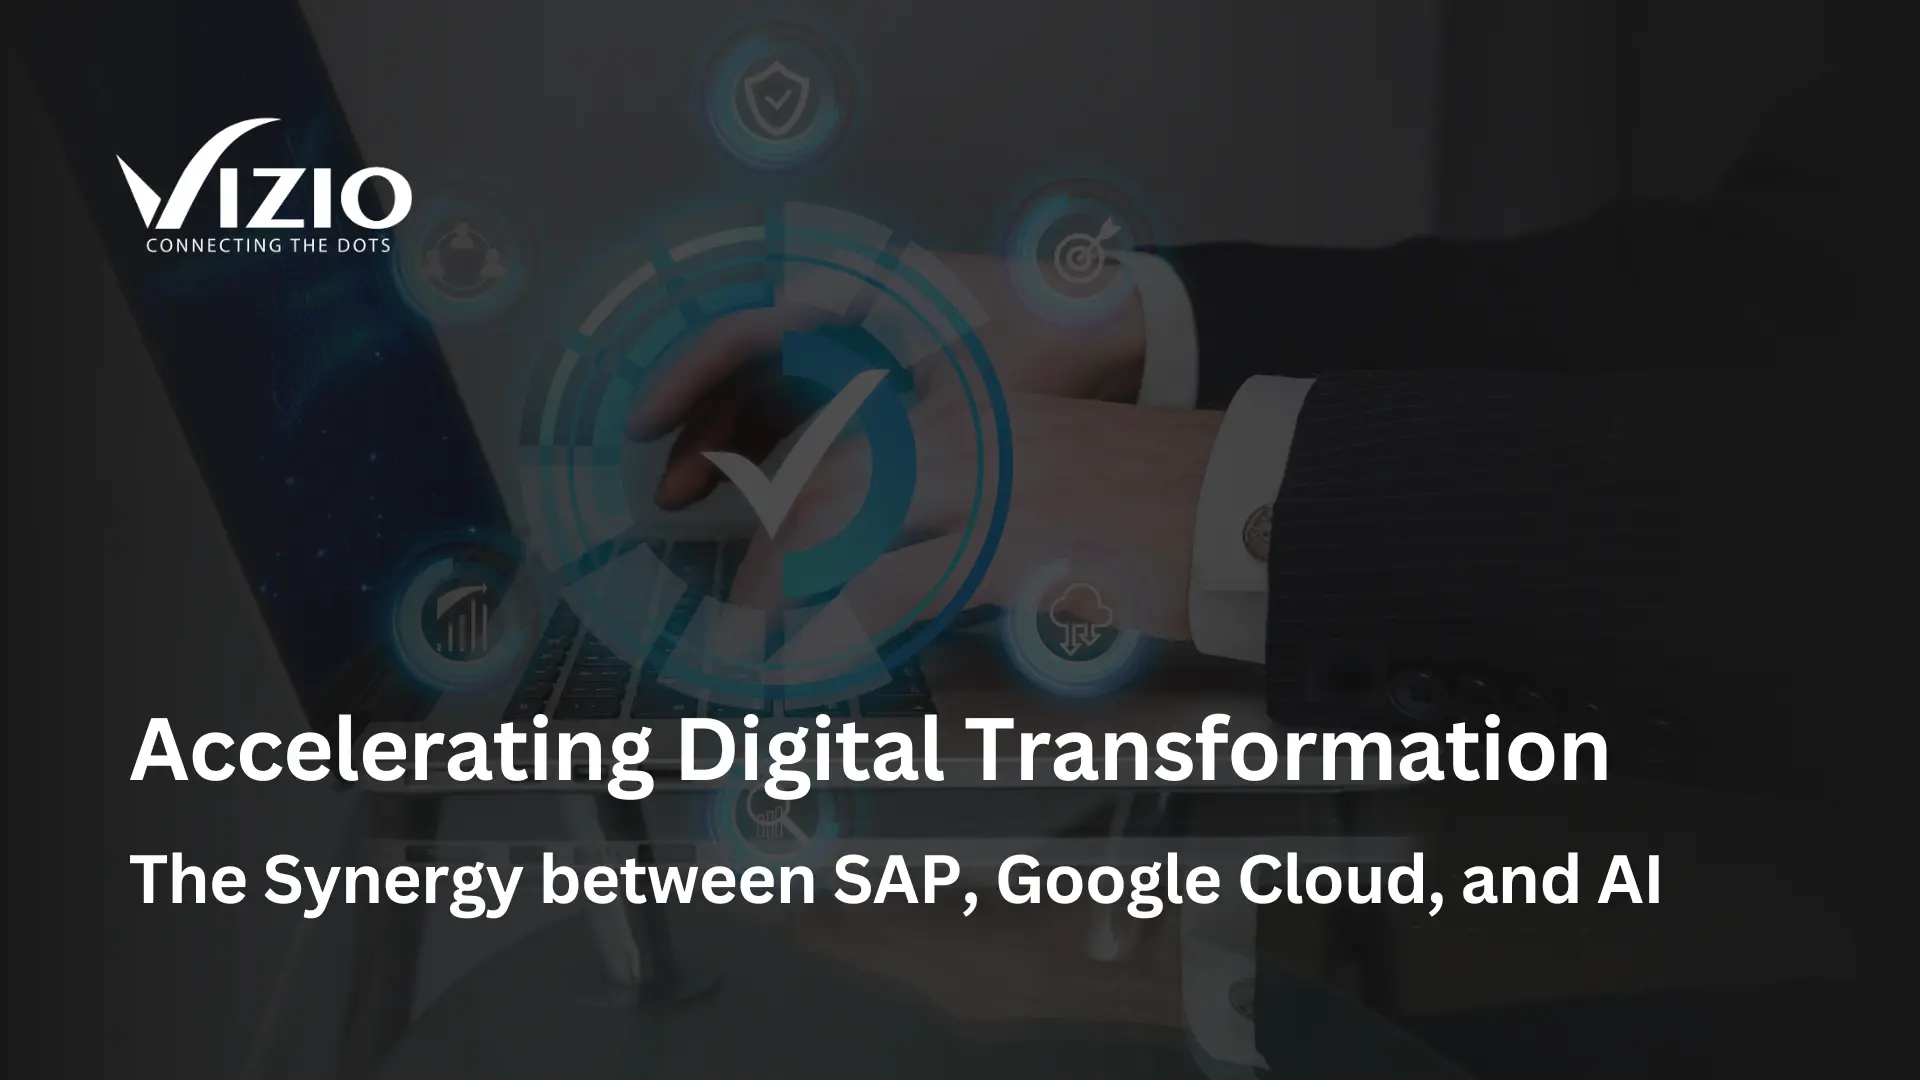 Accelerating Digital Transformation: The Synergy between SAP, Google Cloud, and AI